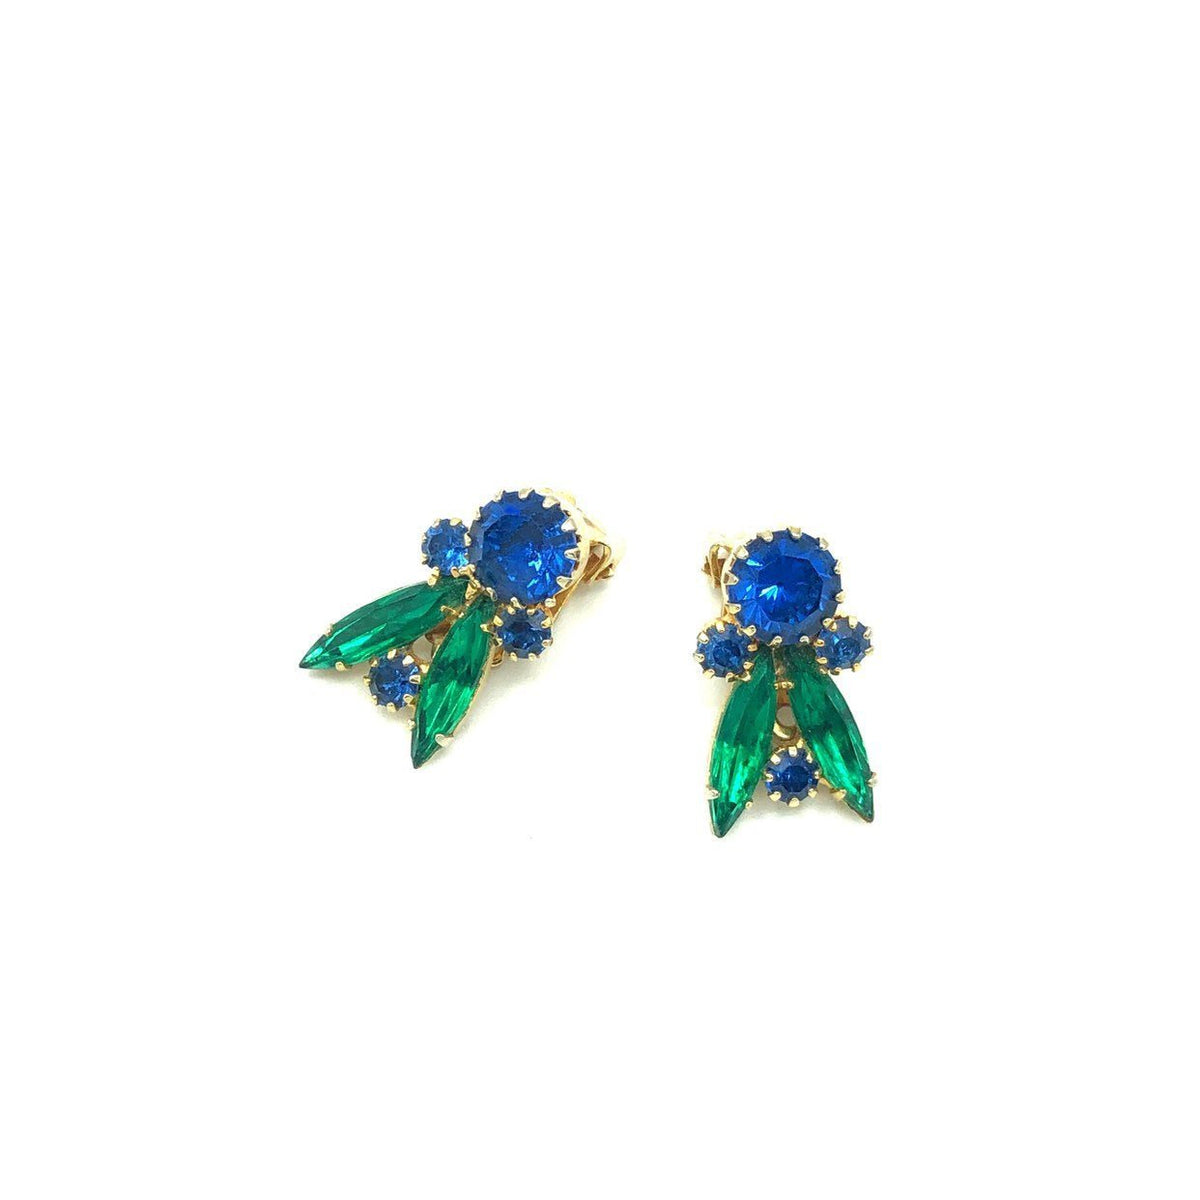 Vintage Blue & Green Rhinestone Floral Clip-On Earrings - 24 Wishes Vintage Jewelry